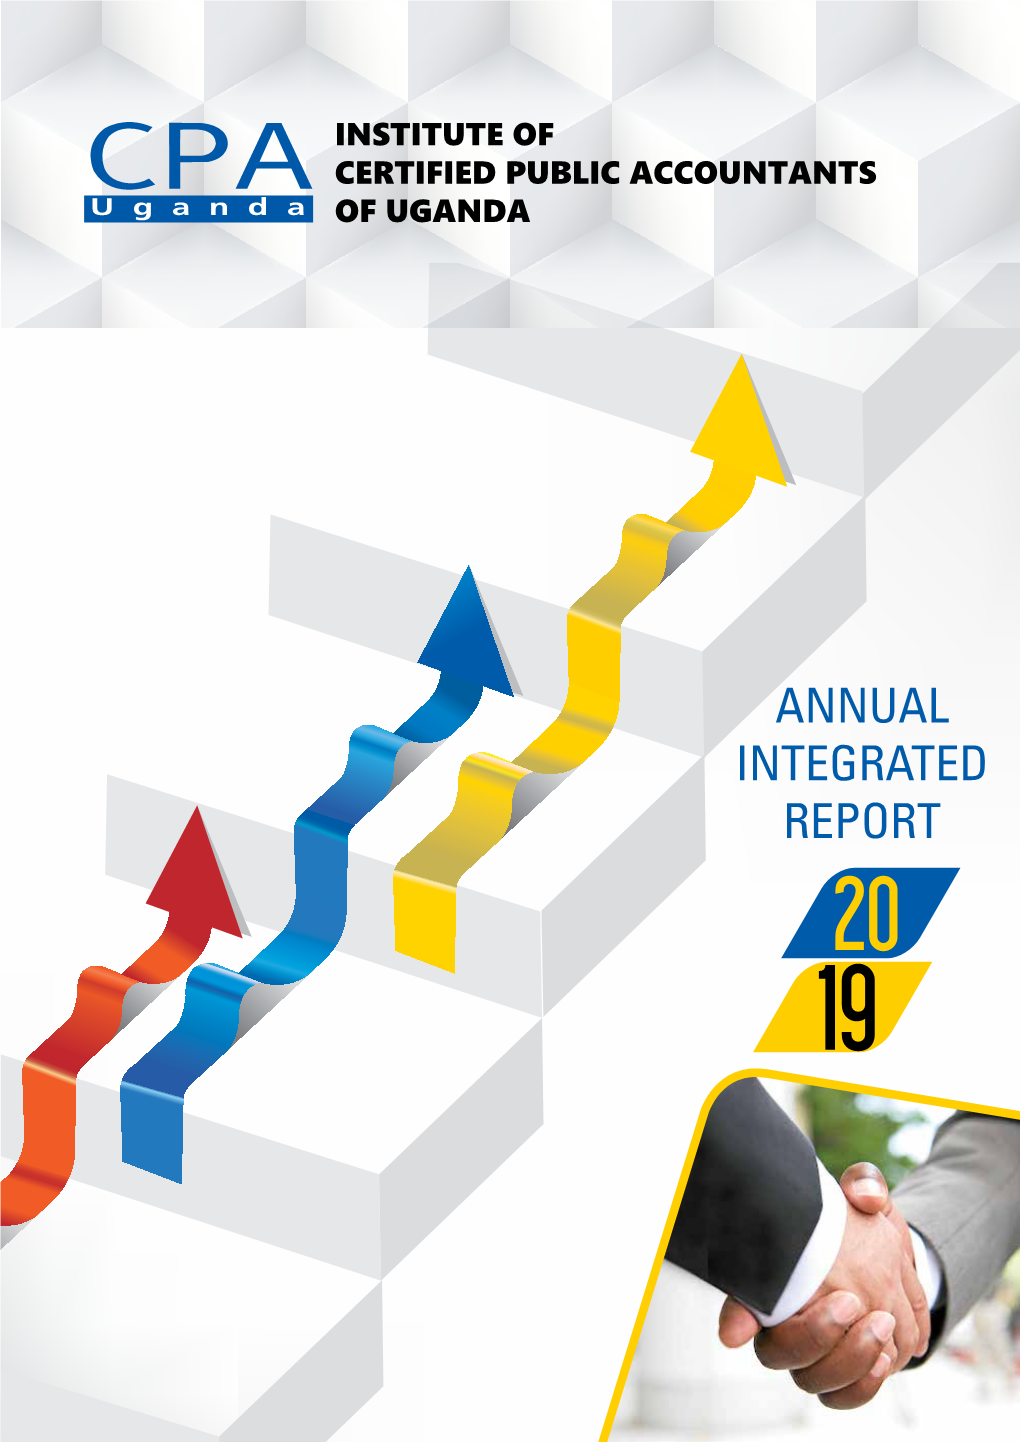 ANNUAL INTEGRATED REPORT 20 19 Ii 2019 ANNUAL REPORT Table of Content